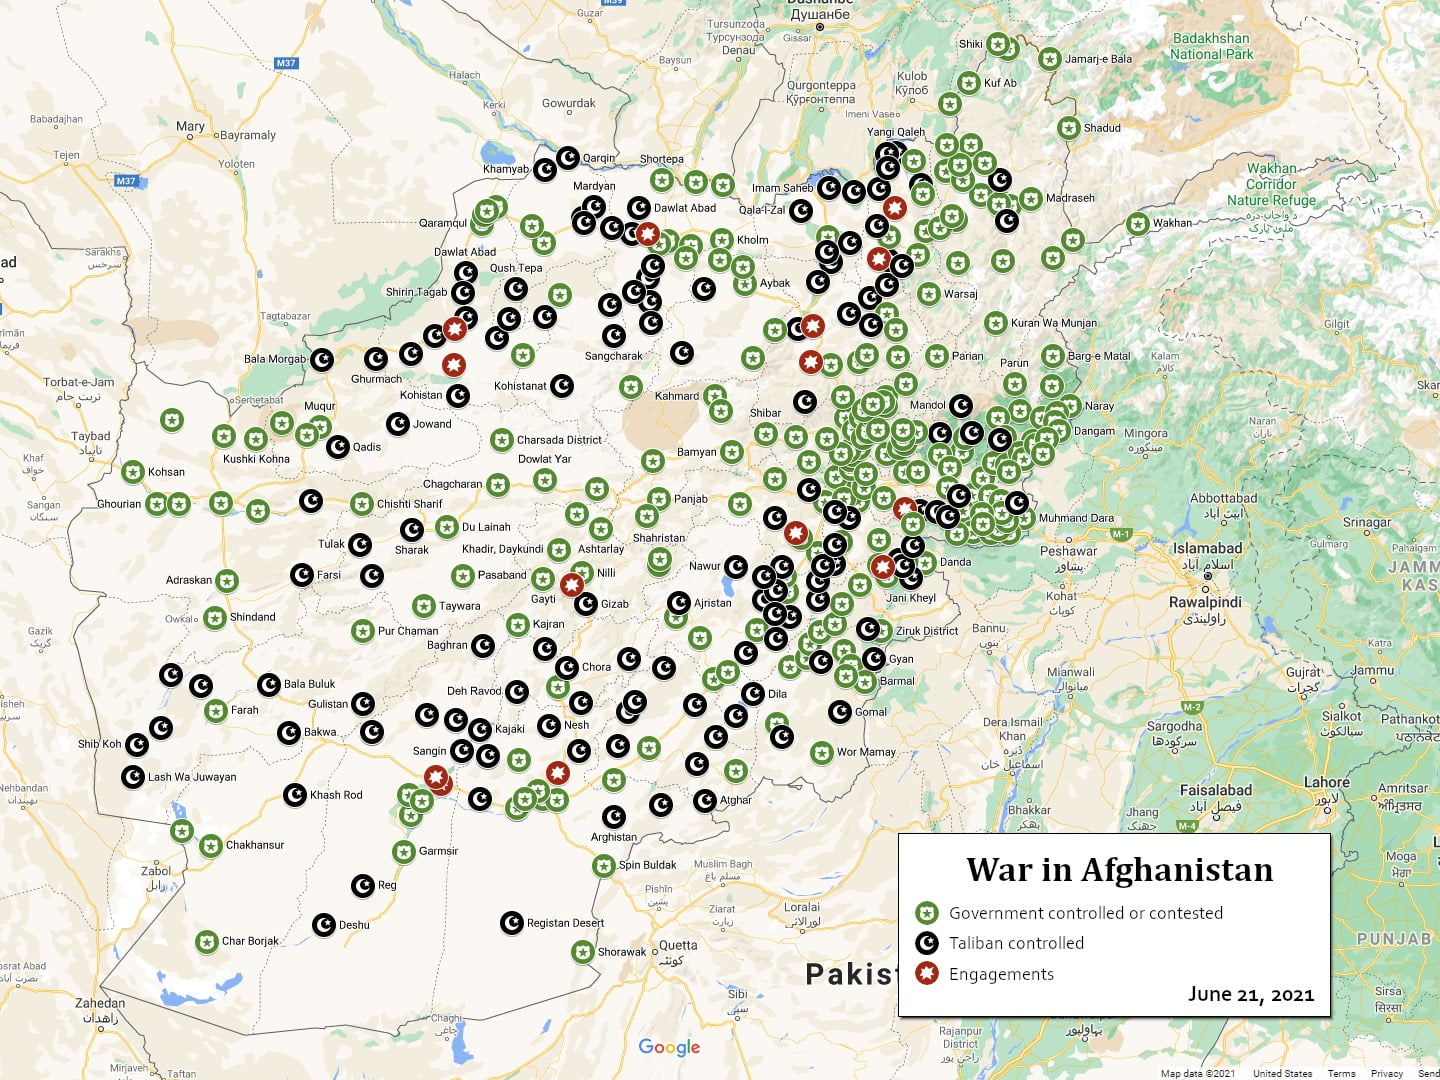 War in Afghanistan map for June 21, 2021